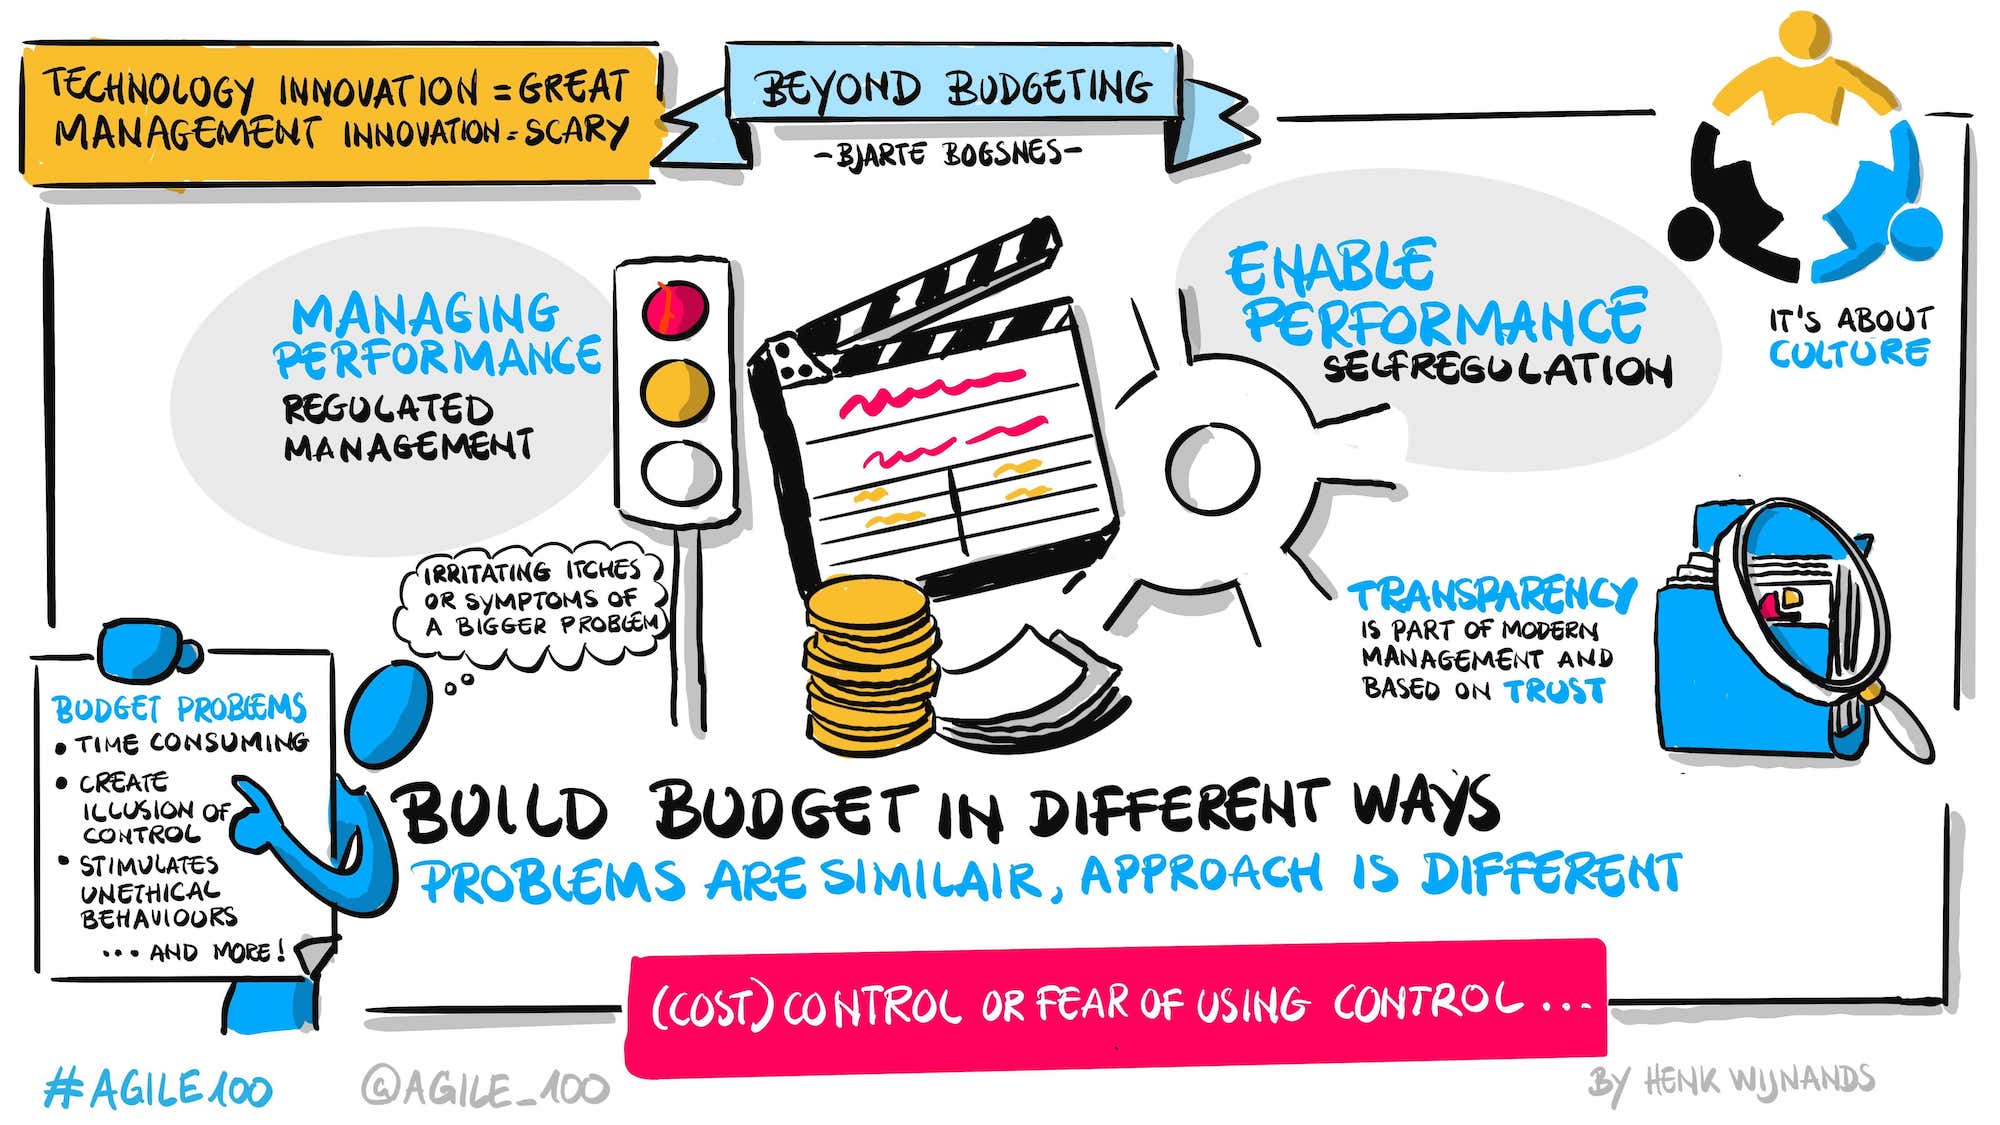 Beyond Budgeting visual from the agile100